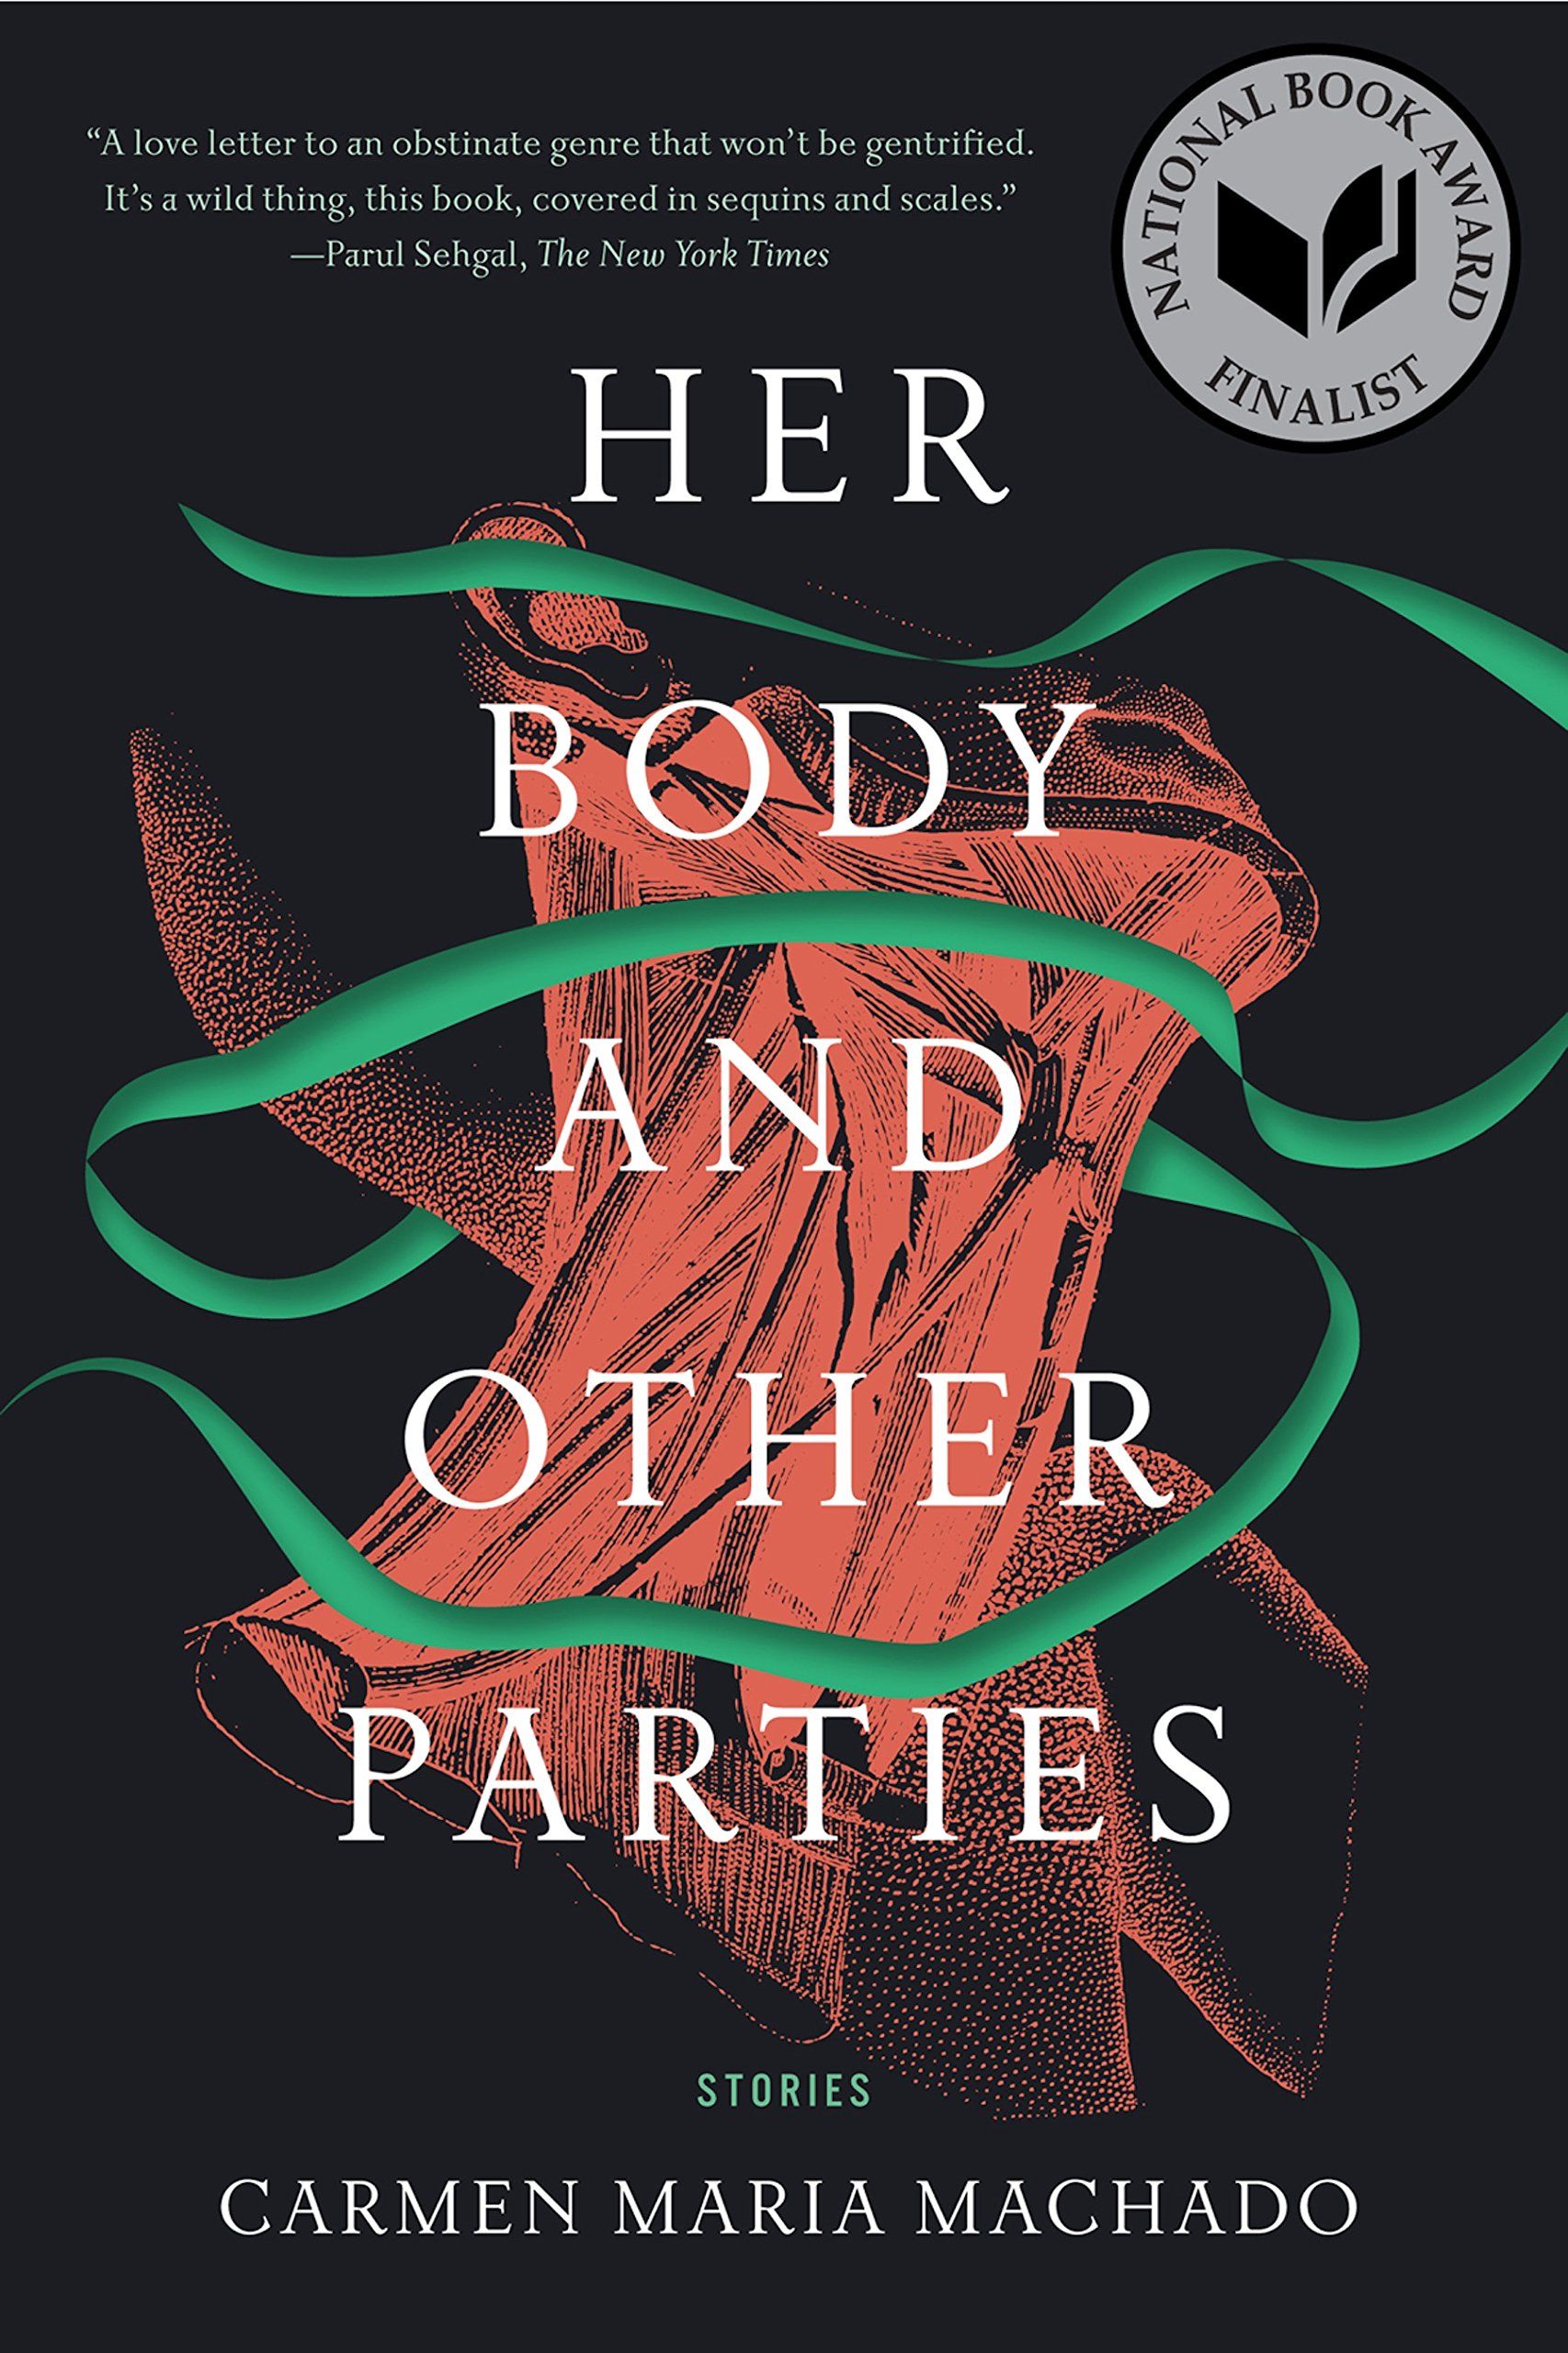 Her Body and Other Parties book cover